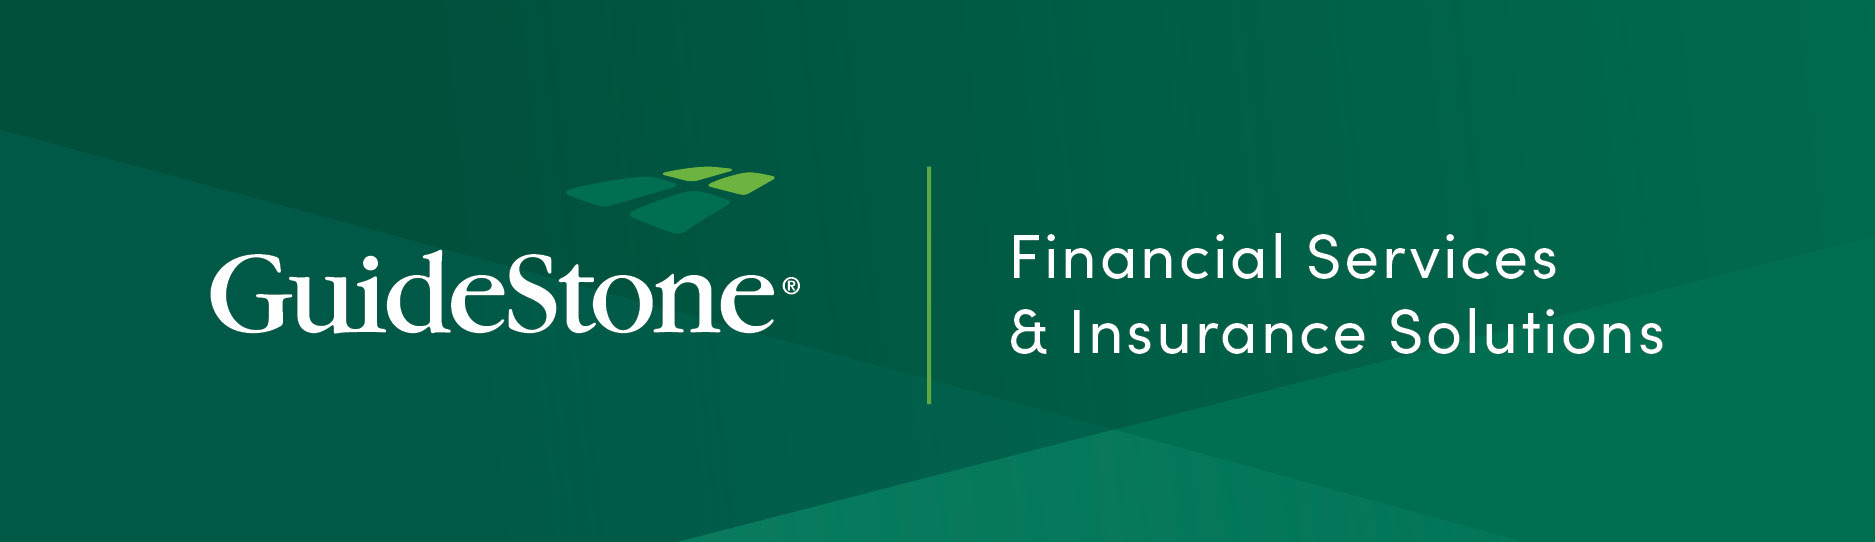 guidestone financial services and insurance solutions